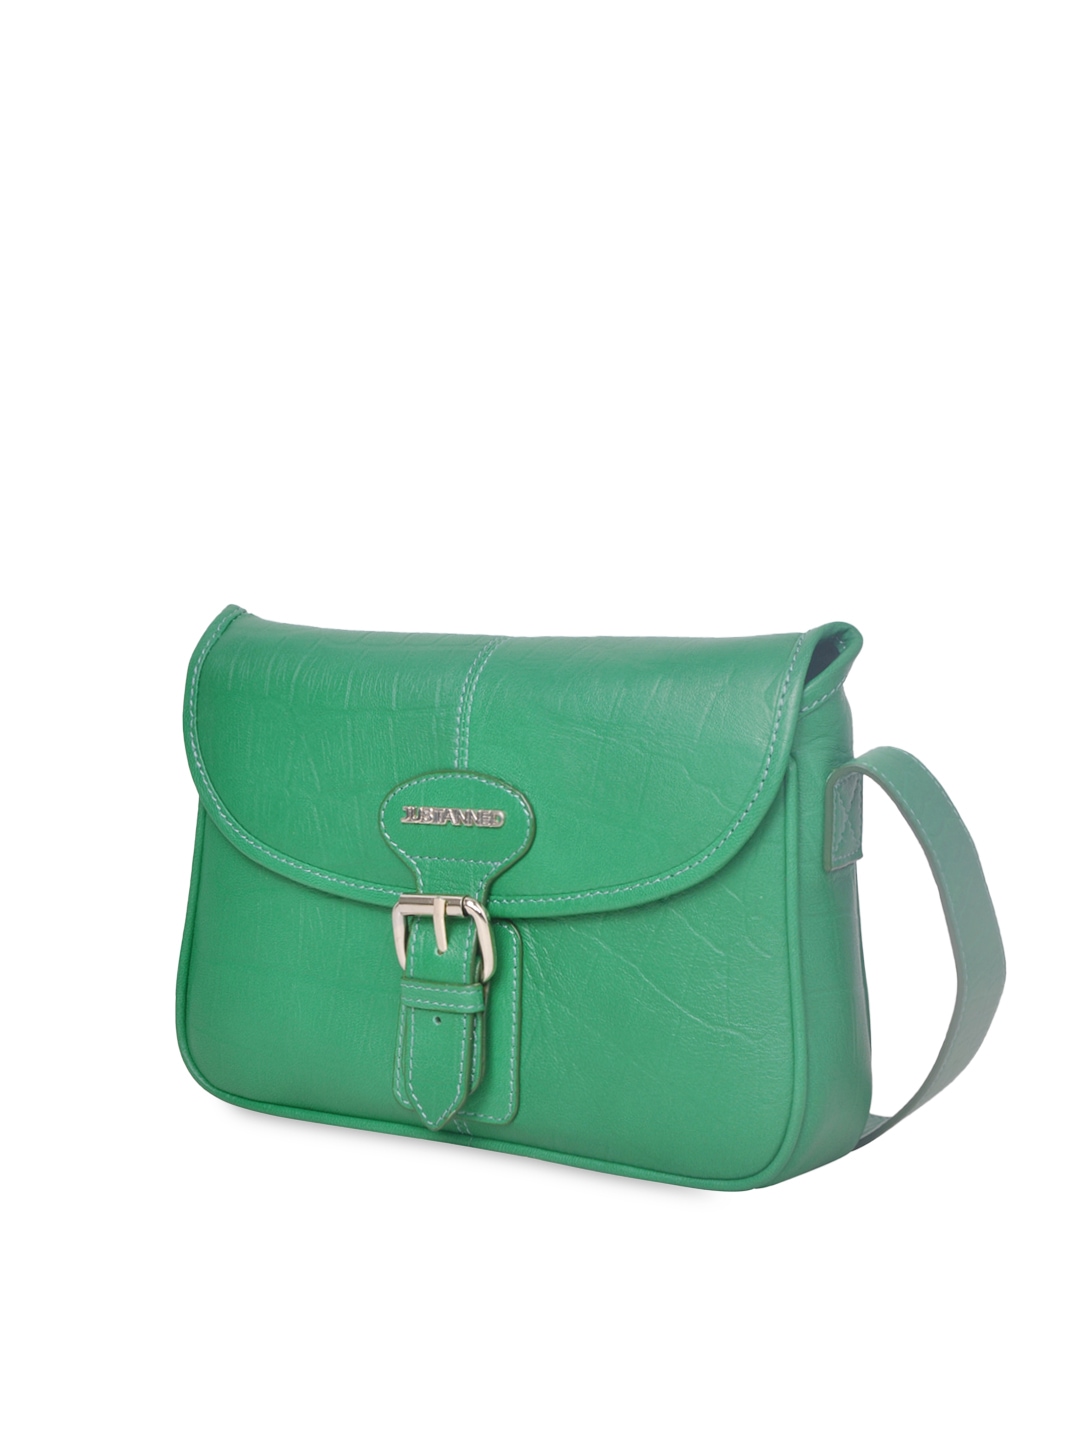 Myntra Justanned Women Green Leather Sling Bag 844166 | Buy Myntra Justanned Handbags at best ...